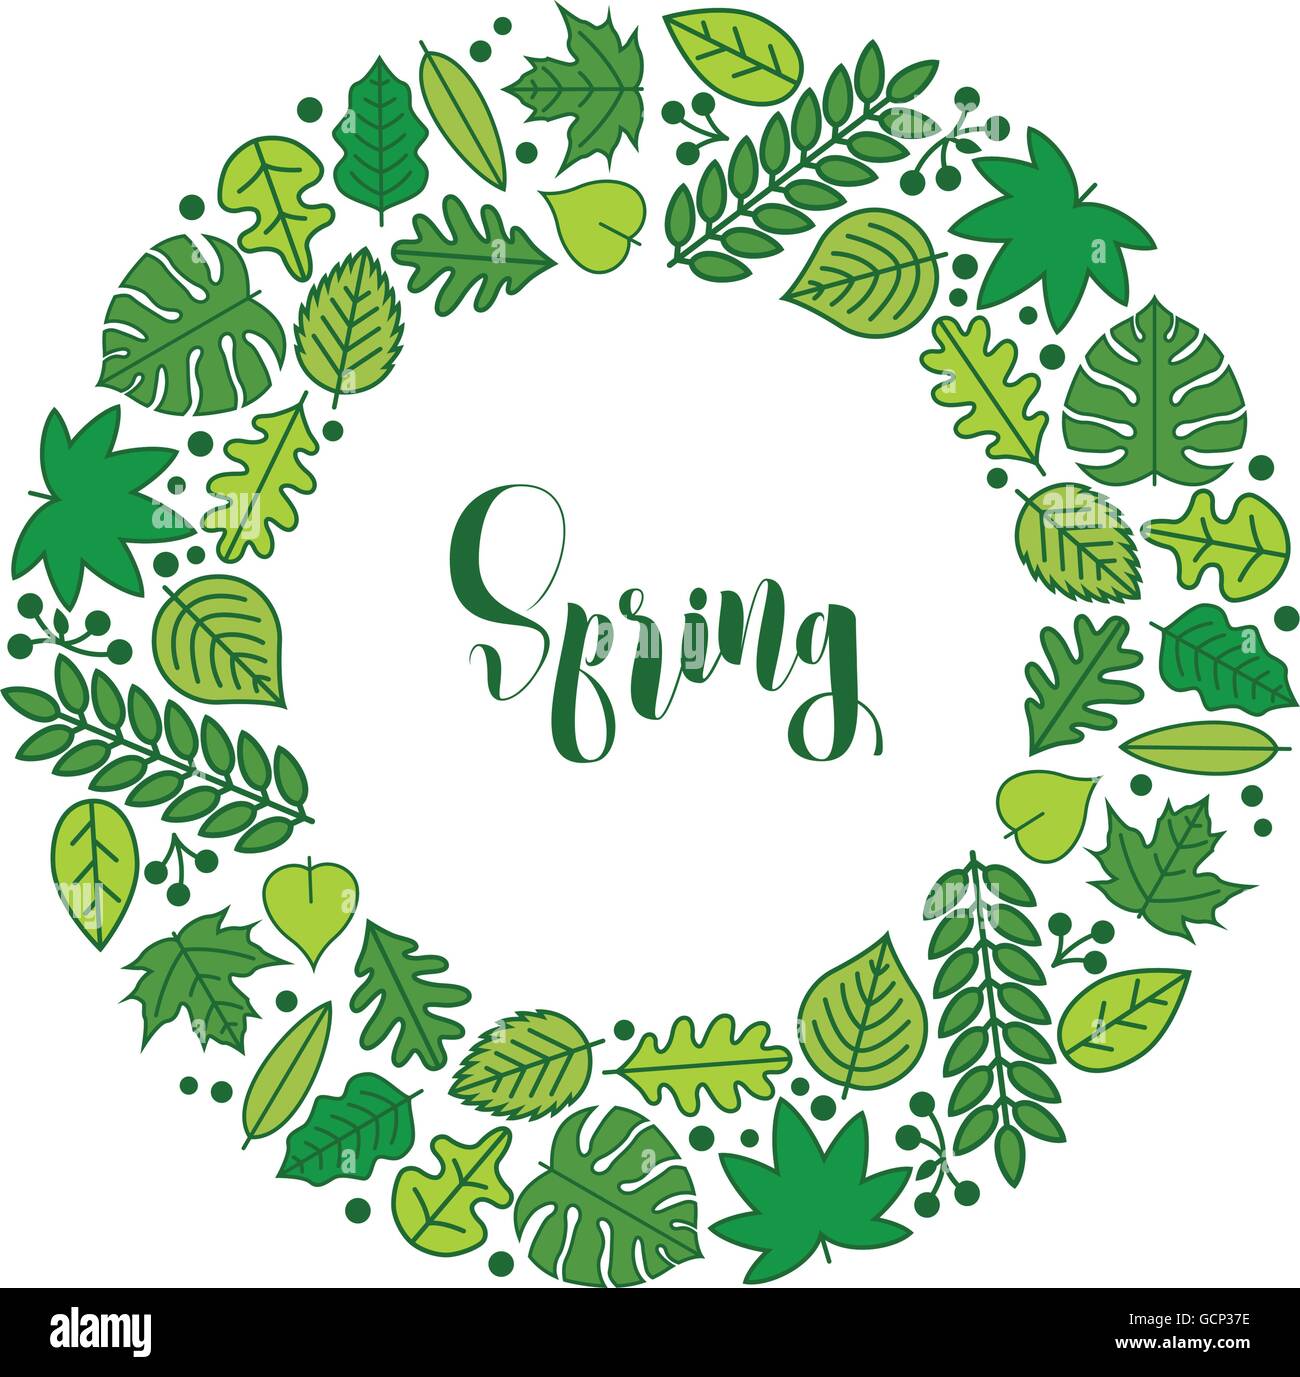 Vector spring frame with various leaf icons. Stock Vector